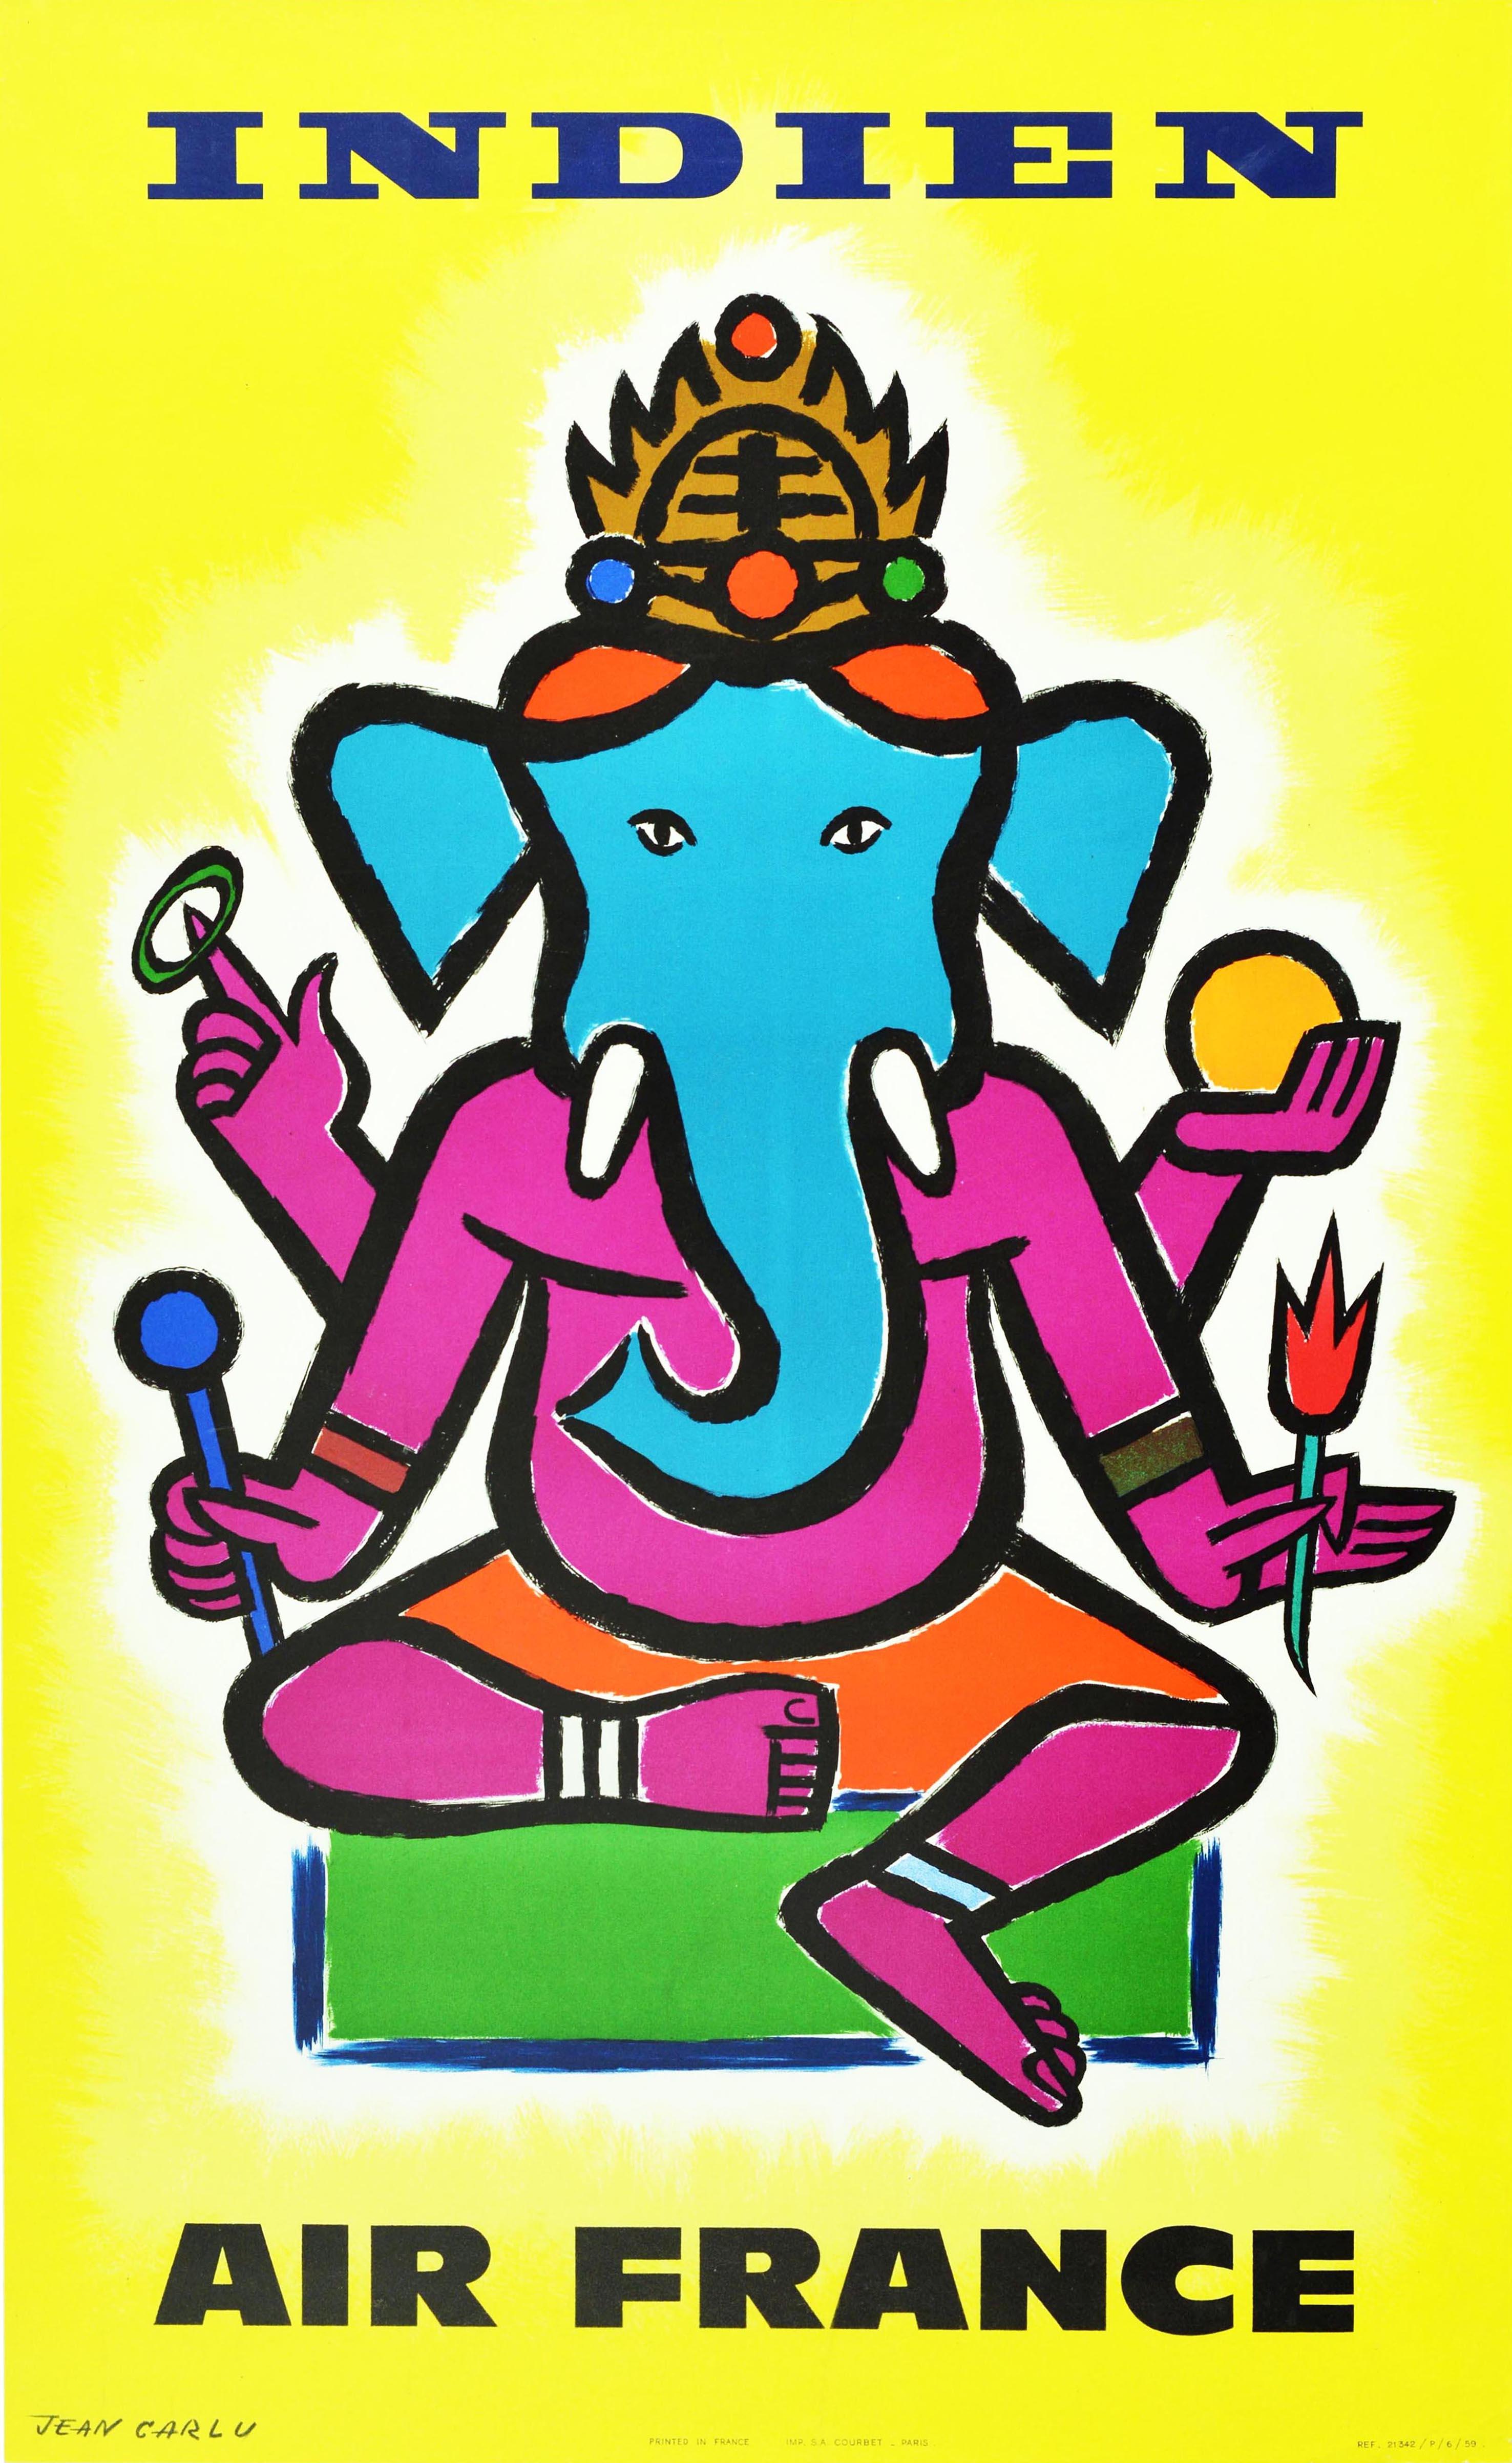 Original vintage travel poster promoting India issued by Air France - Indien Air France. Bold and colourful image by the French graphic designer Jean Carlu (1900-1997) featuring the Hindu elephant deity Ganesha depicted in bright purple, orange,